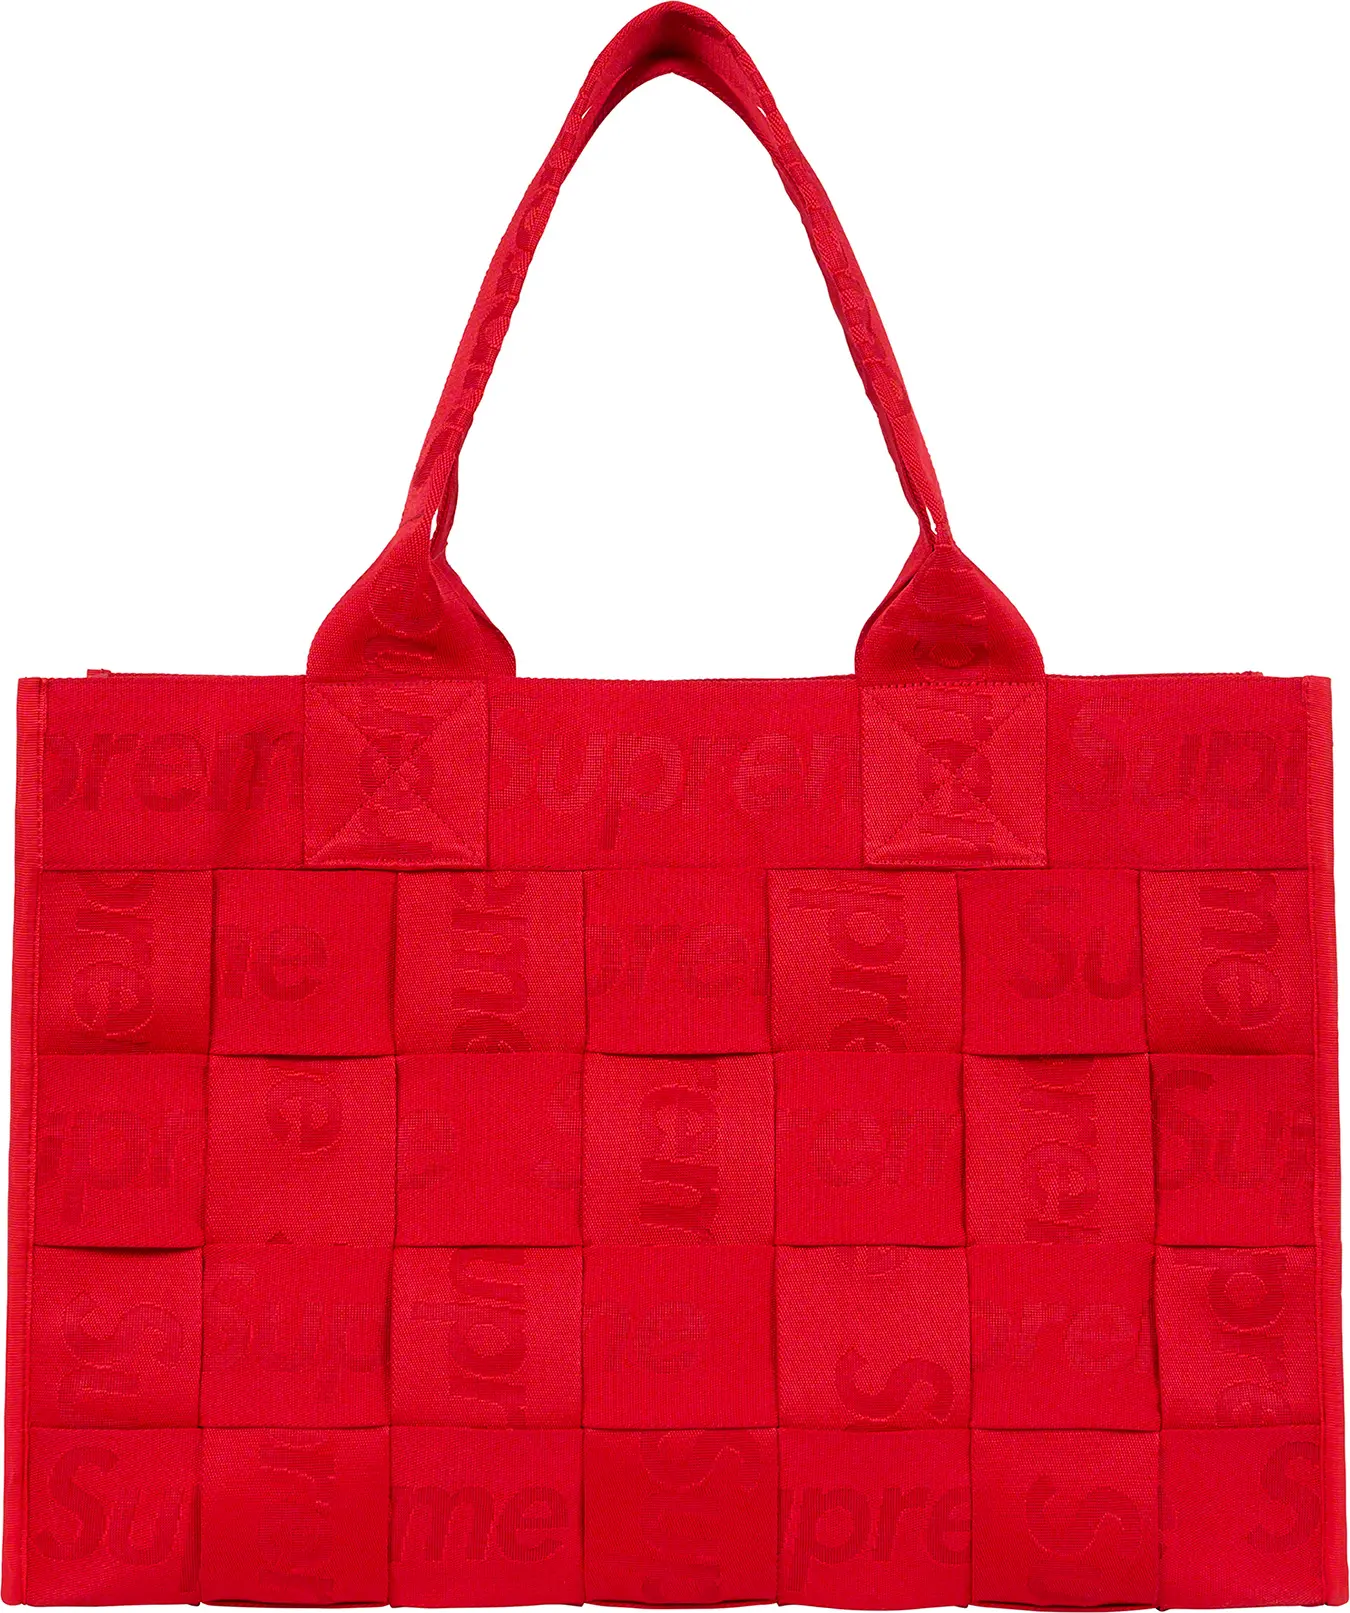 Supreme Woven Large Tote Bag ステッカー付き | www.sportique.nu